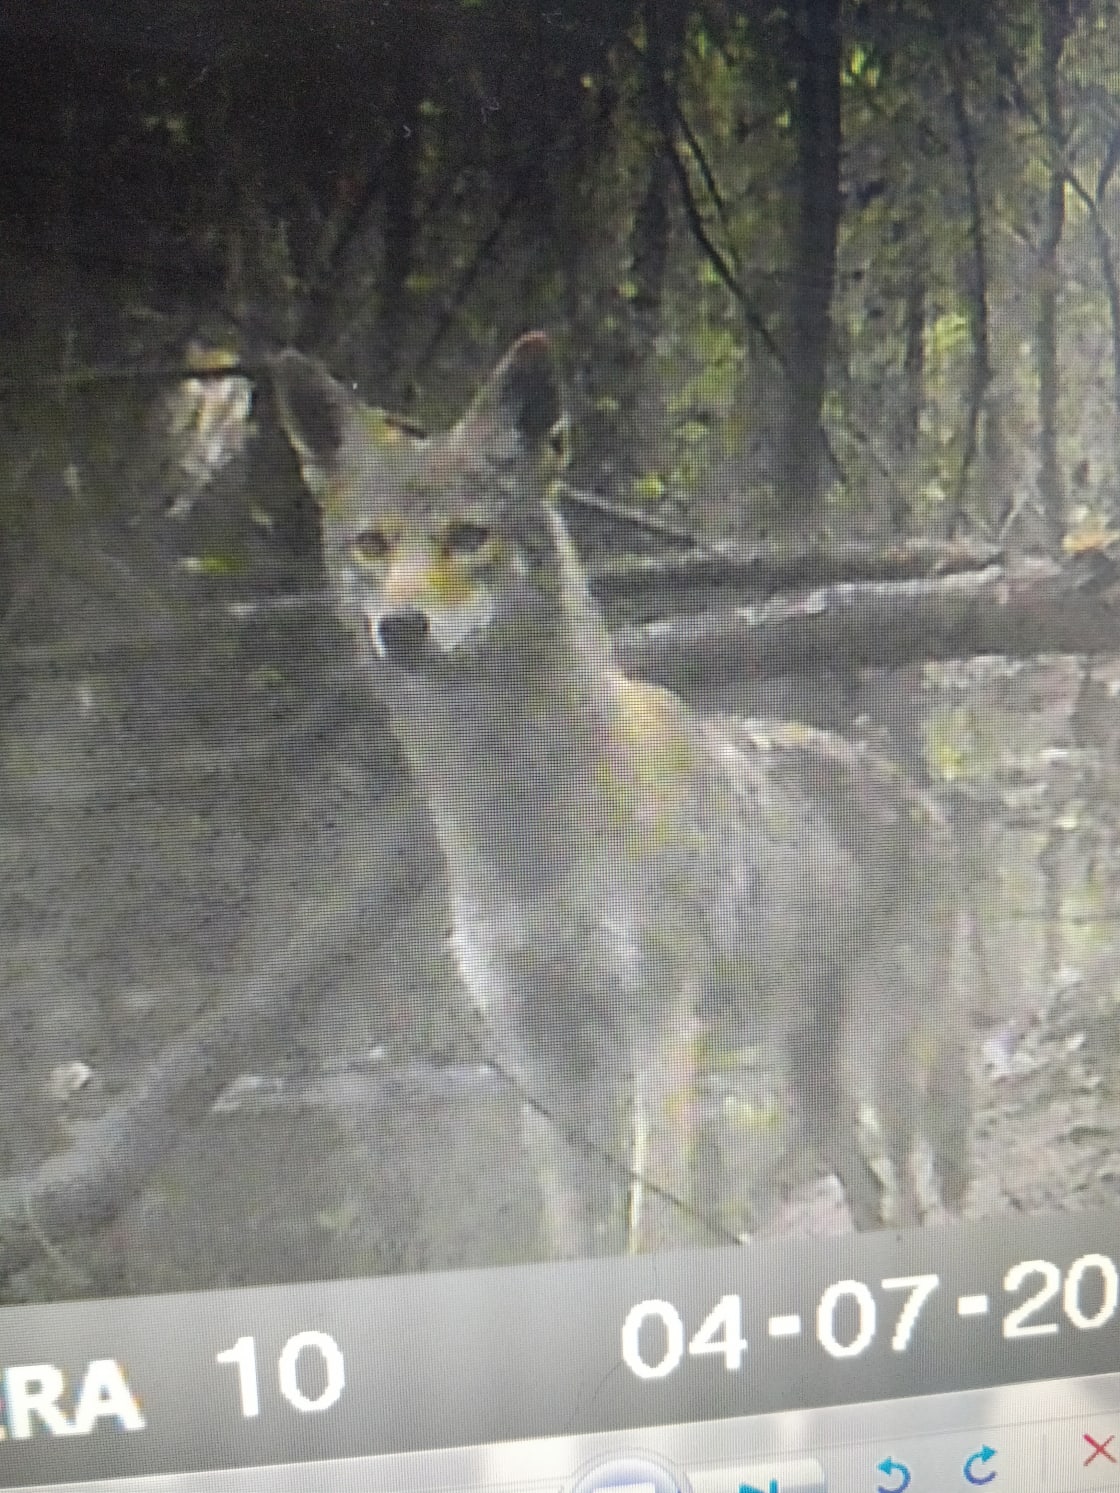 Our trail cam captured a picture of this little guy. 